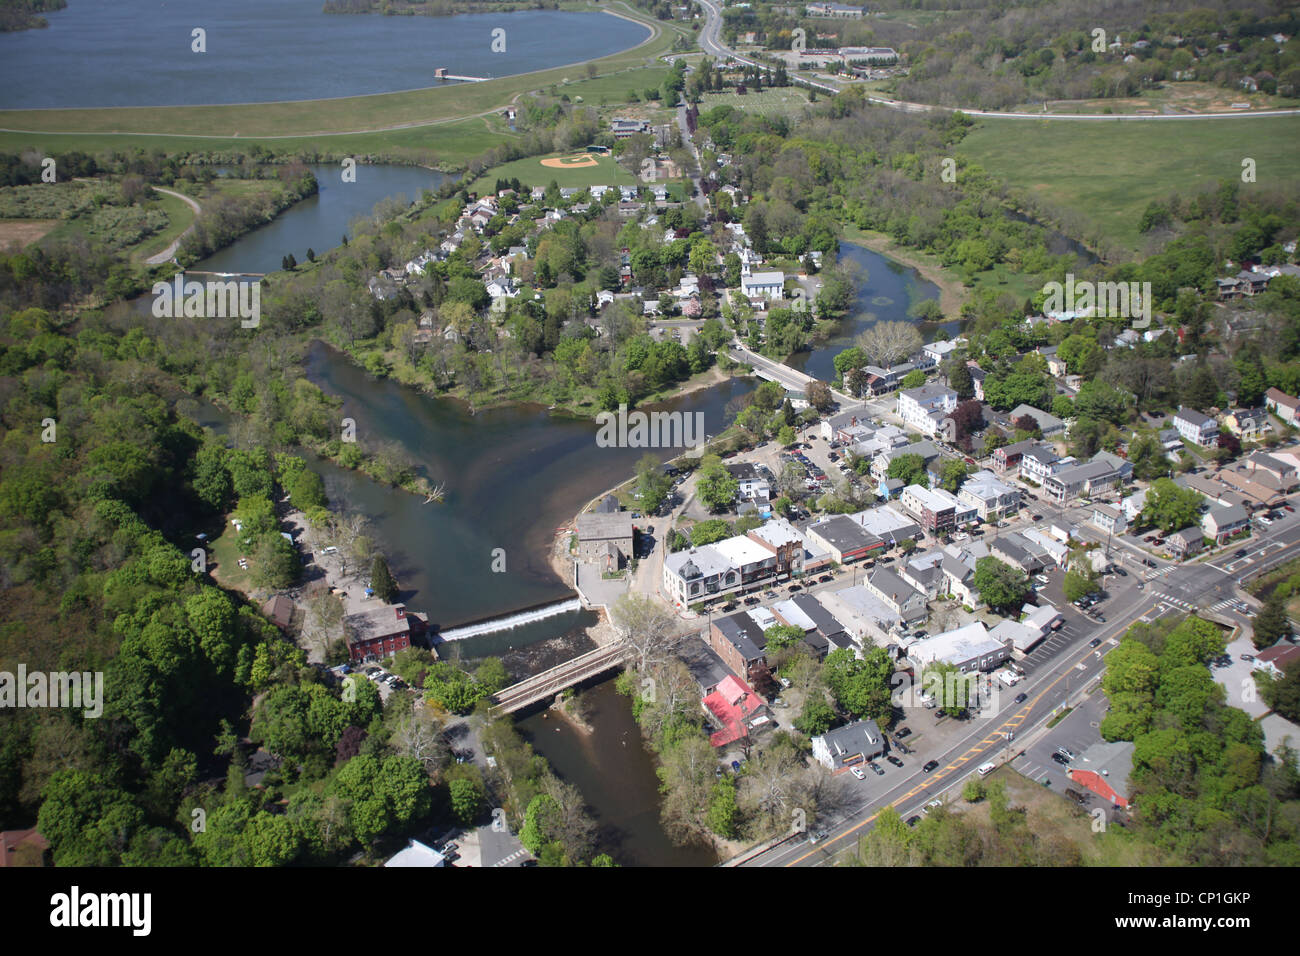 Aerial photo of Town of Clinton, located in Hunterdon County, New Jersey. Stock Photo